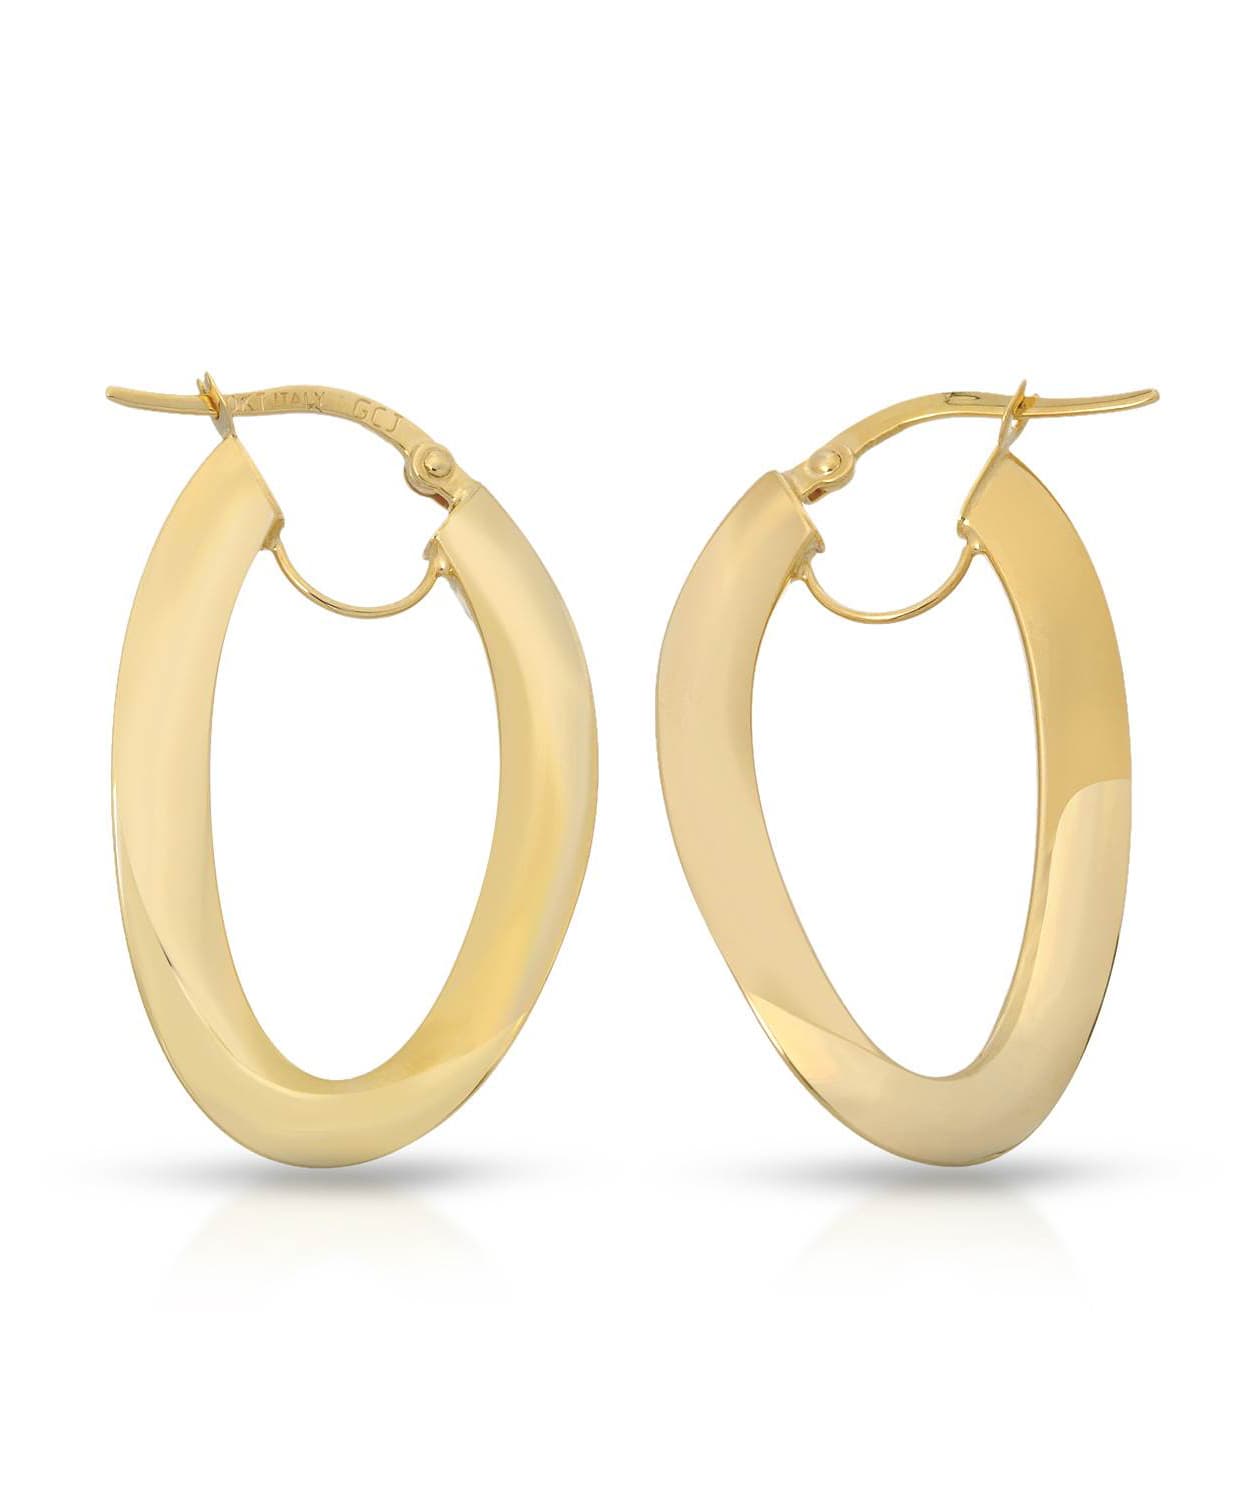 Esemco 10k Yellow Gold Contemporary Hoop Earrings View 1